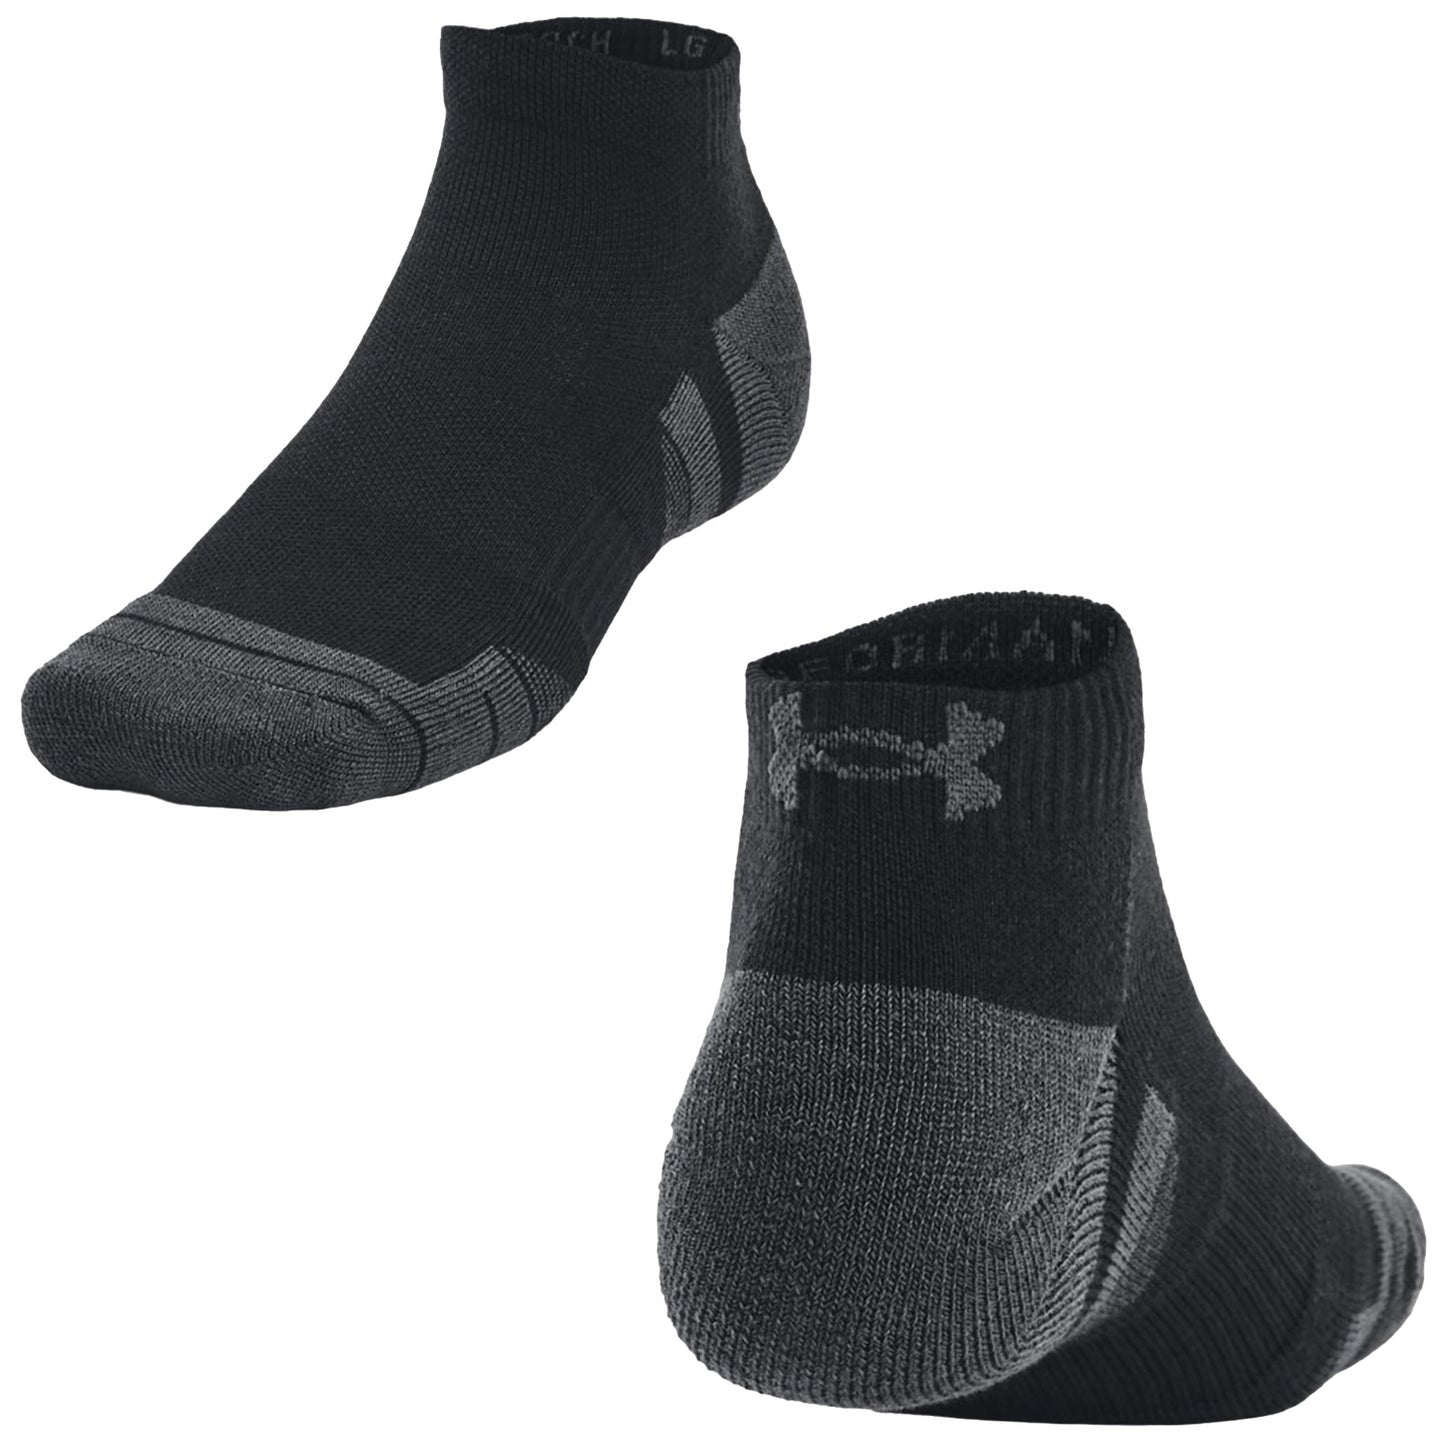 Under Armour Performance Tech Low Socks (3 Pairs)